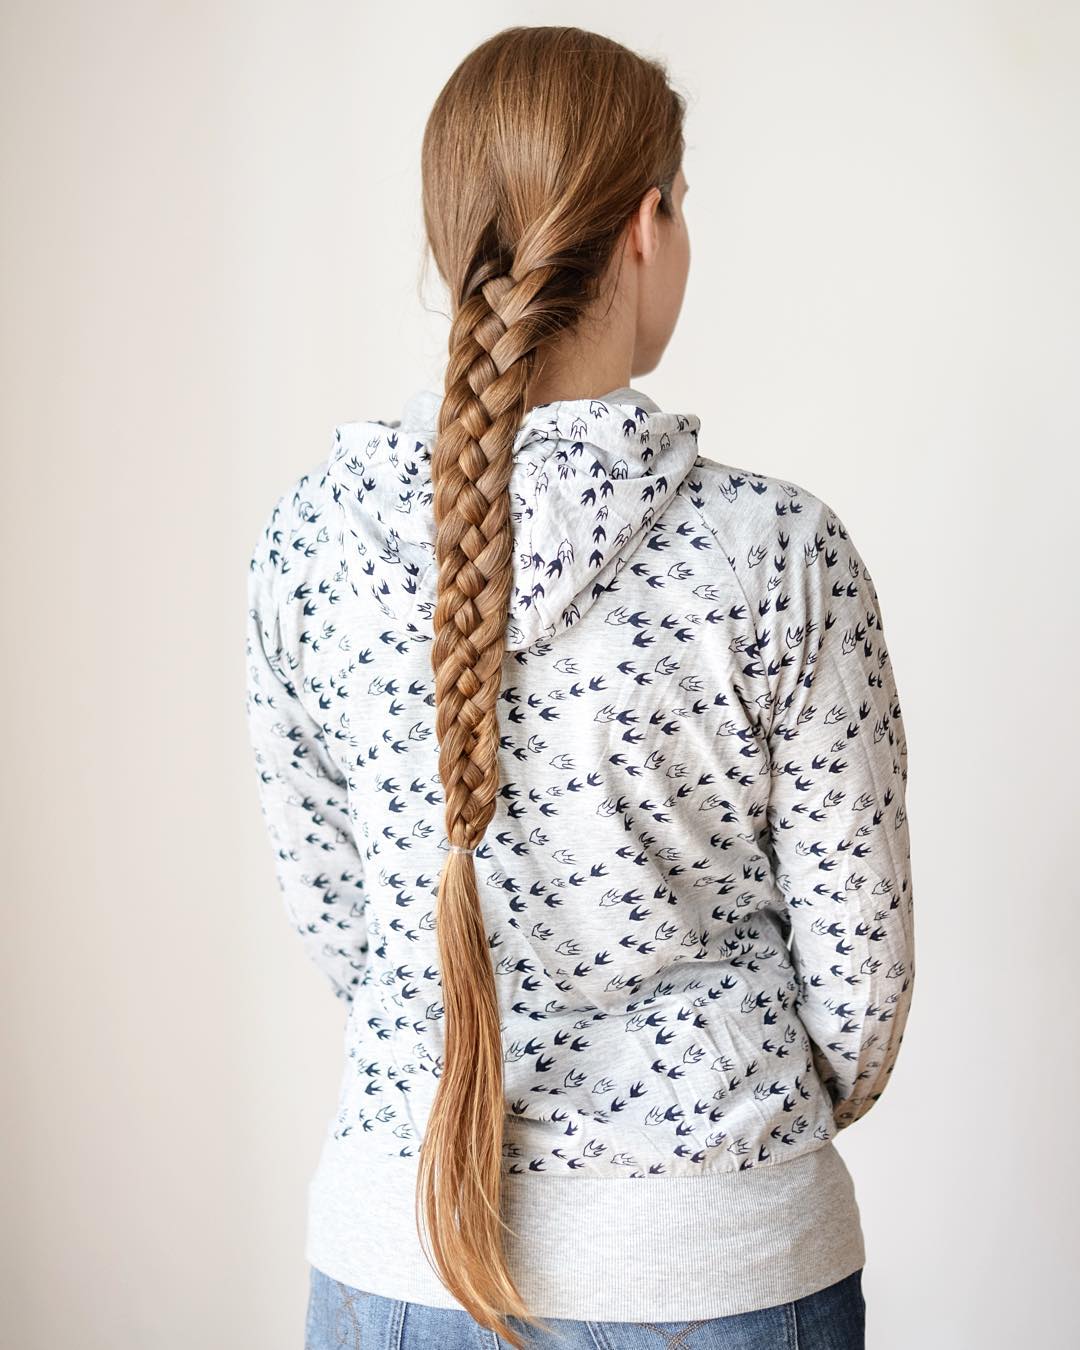 long 4 braided hairstyle